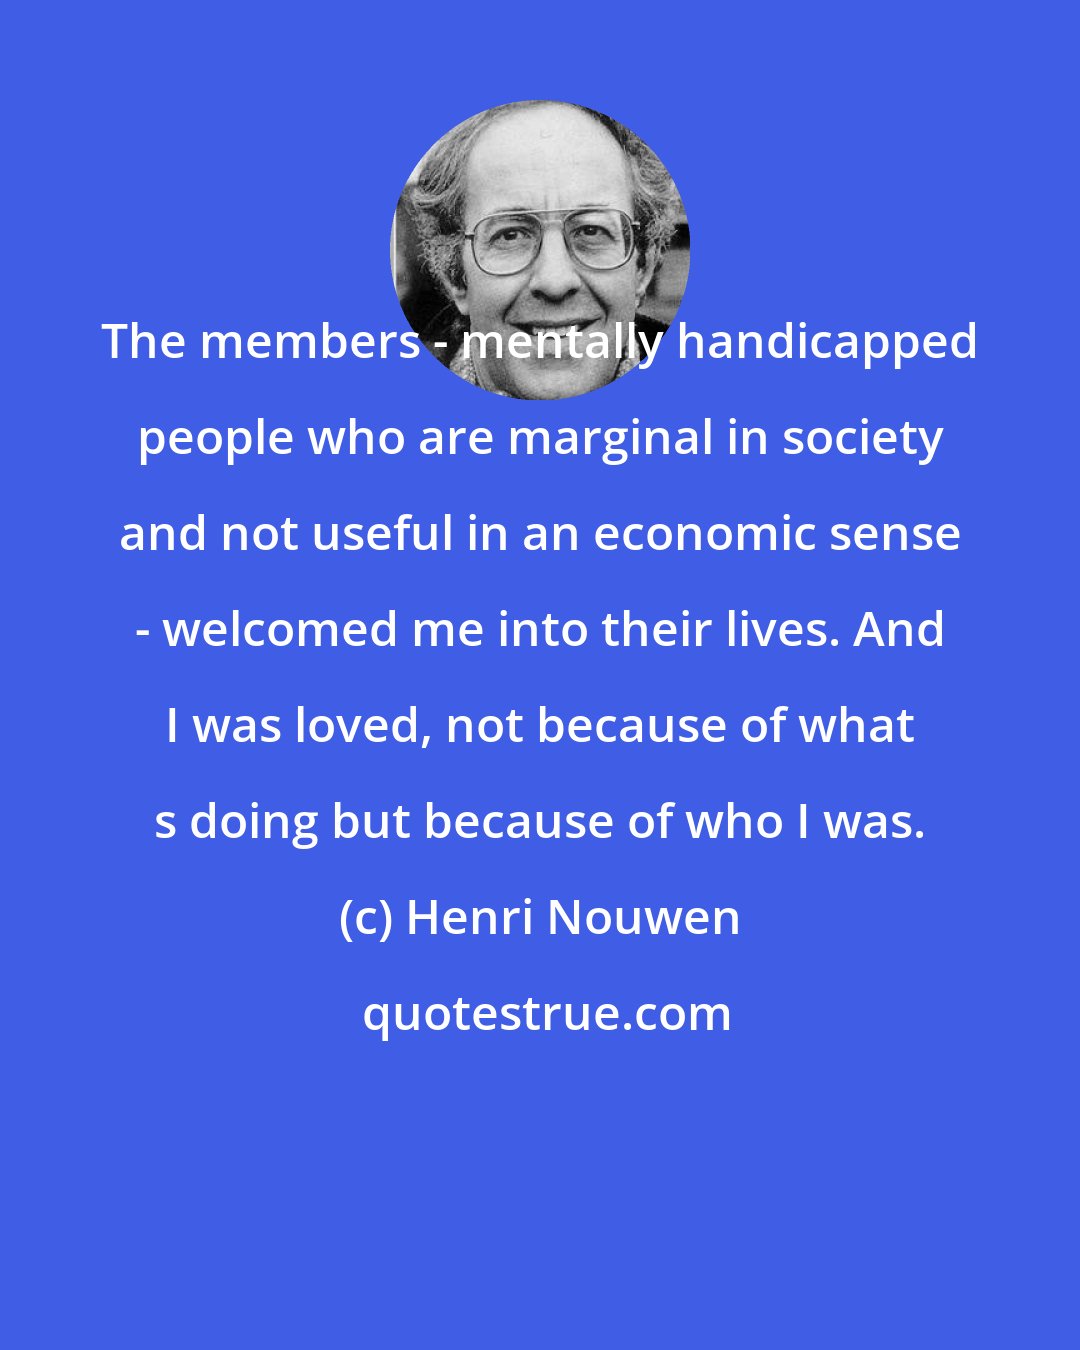 Henri Nouwen: The members - mentally handicapped people who are marginal in society and not useful in an economic sense - welcomed me into their lives. And I was loved, not because of what s doing but because of who I was.